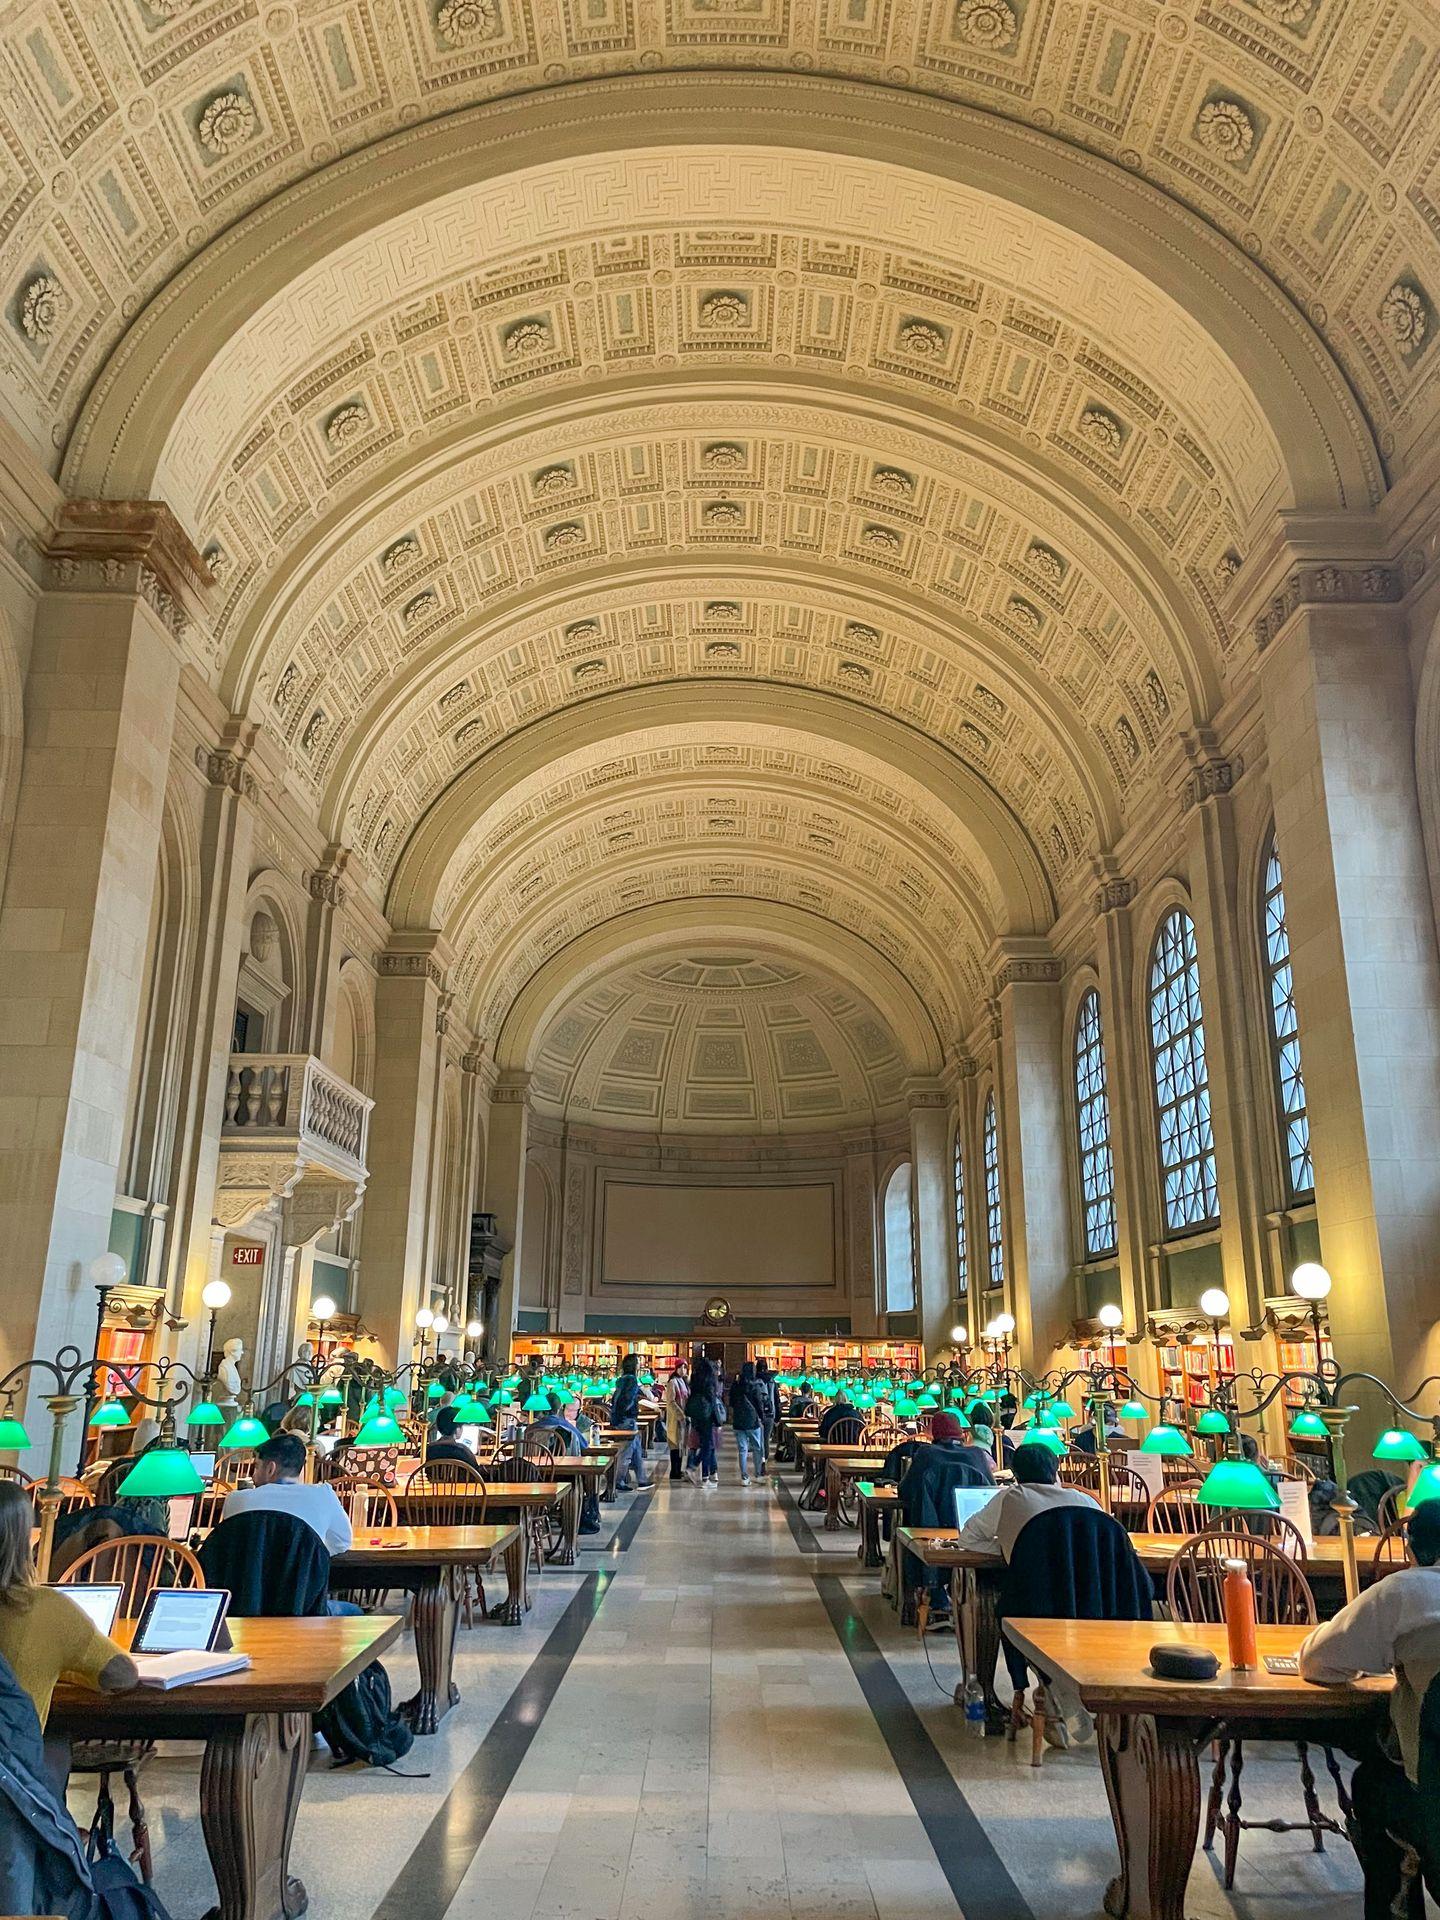 Inside of the Bates Hall in the Boston Public Library. There are several tables with green lamps and a tall, arched ceiling